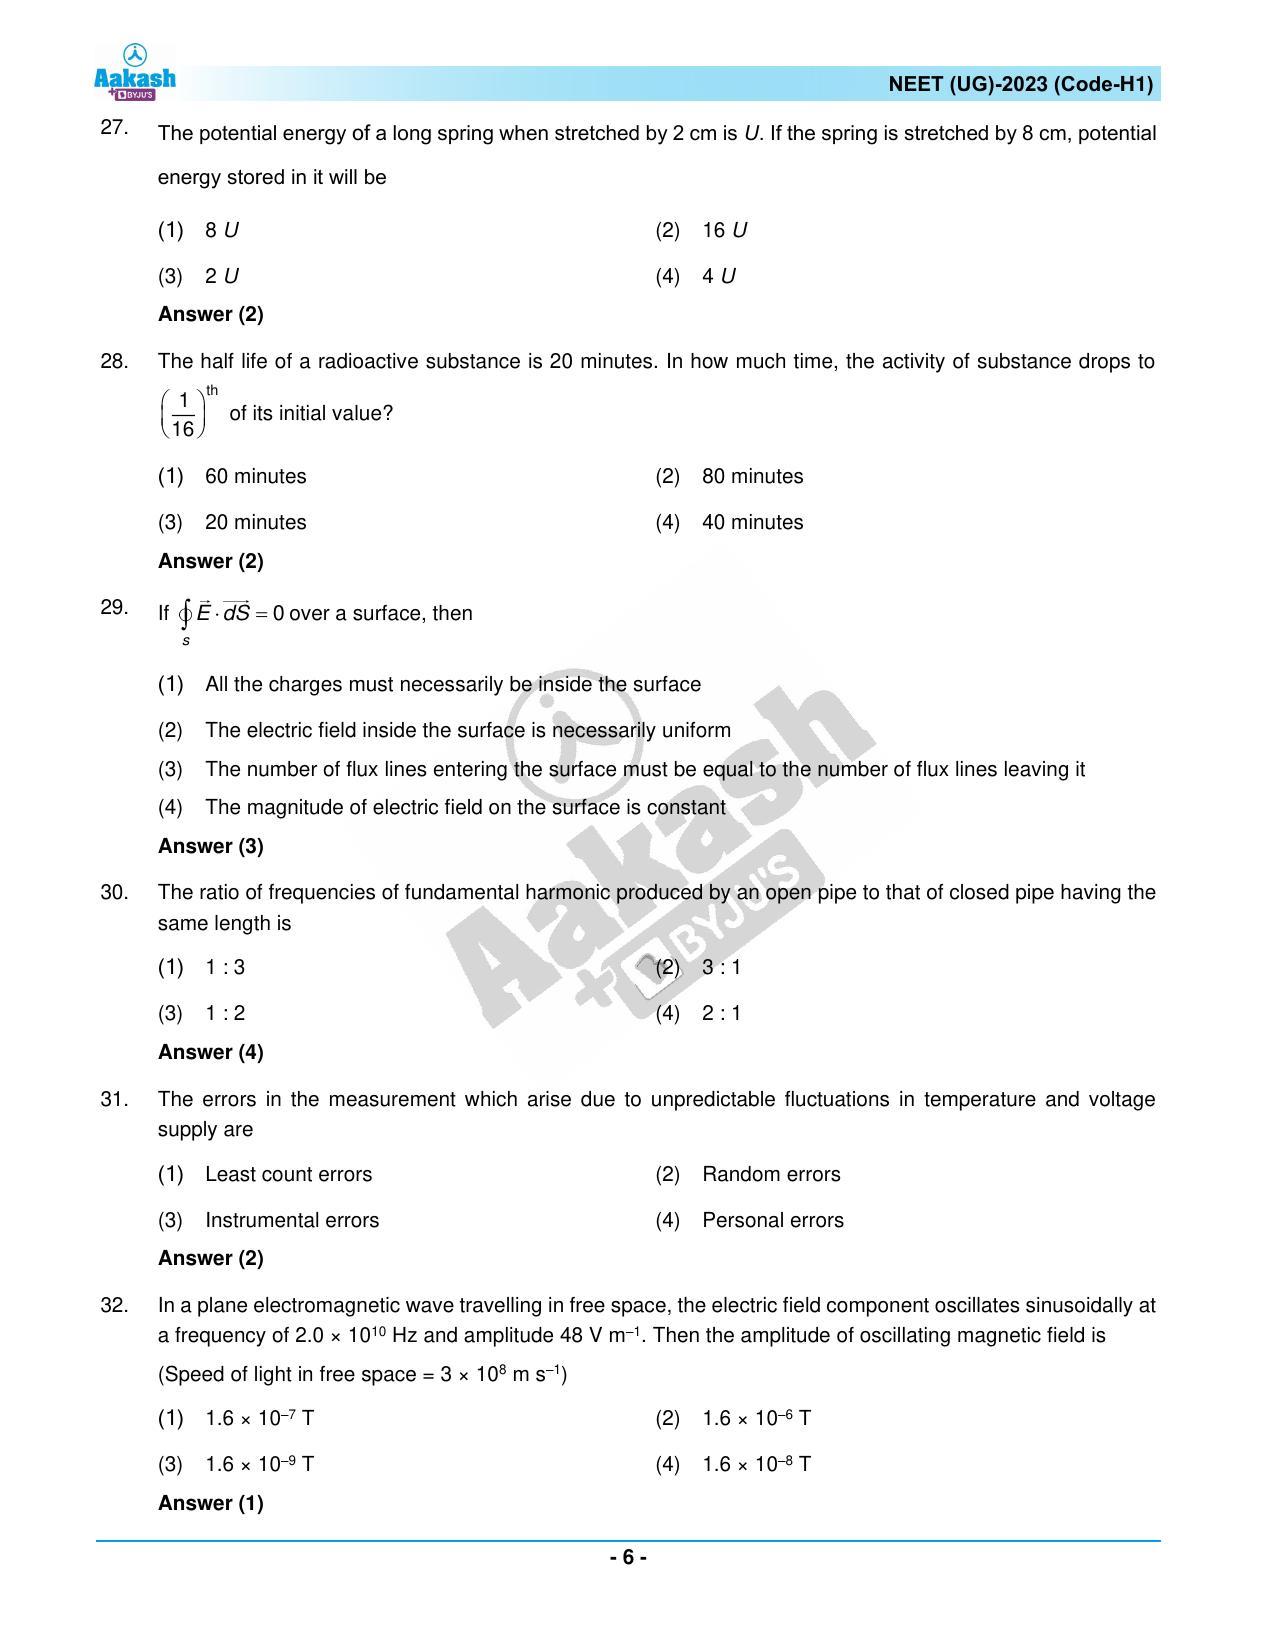 NEET 2023 Question Paper H1 - Page 6